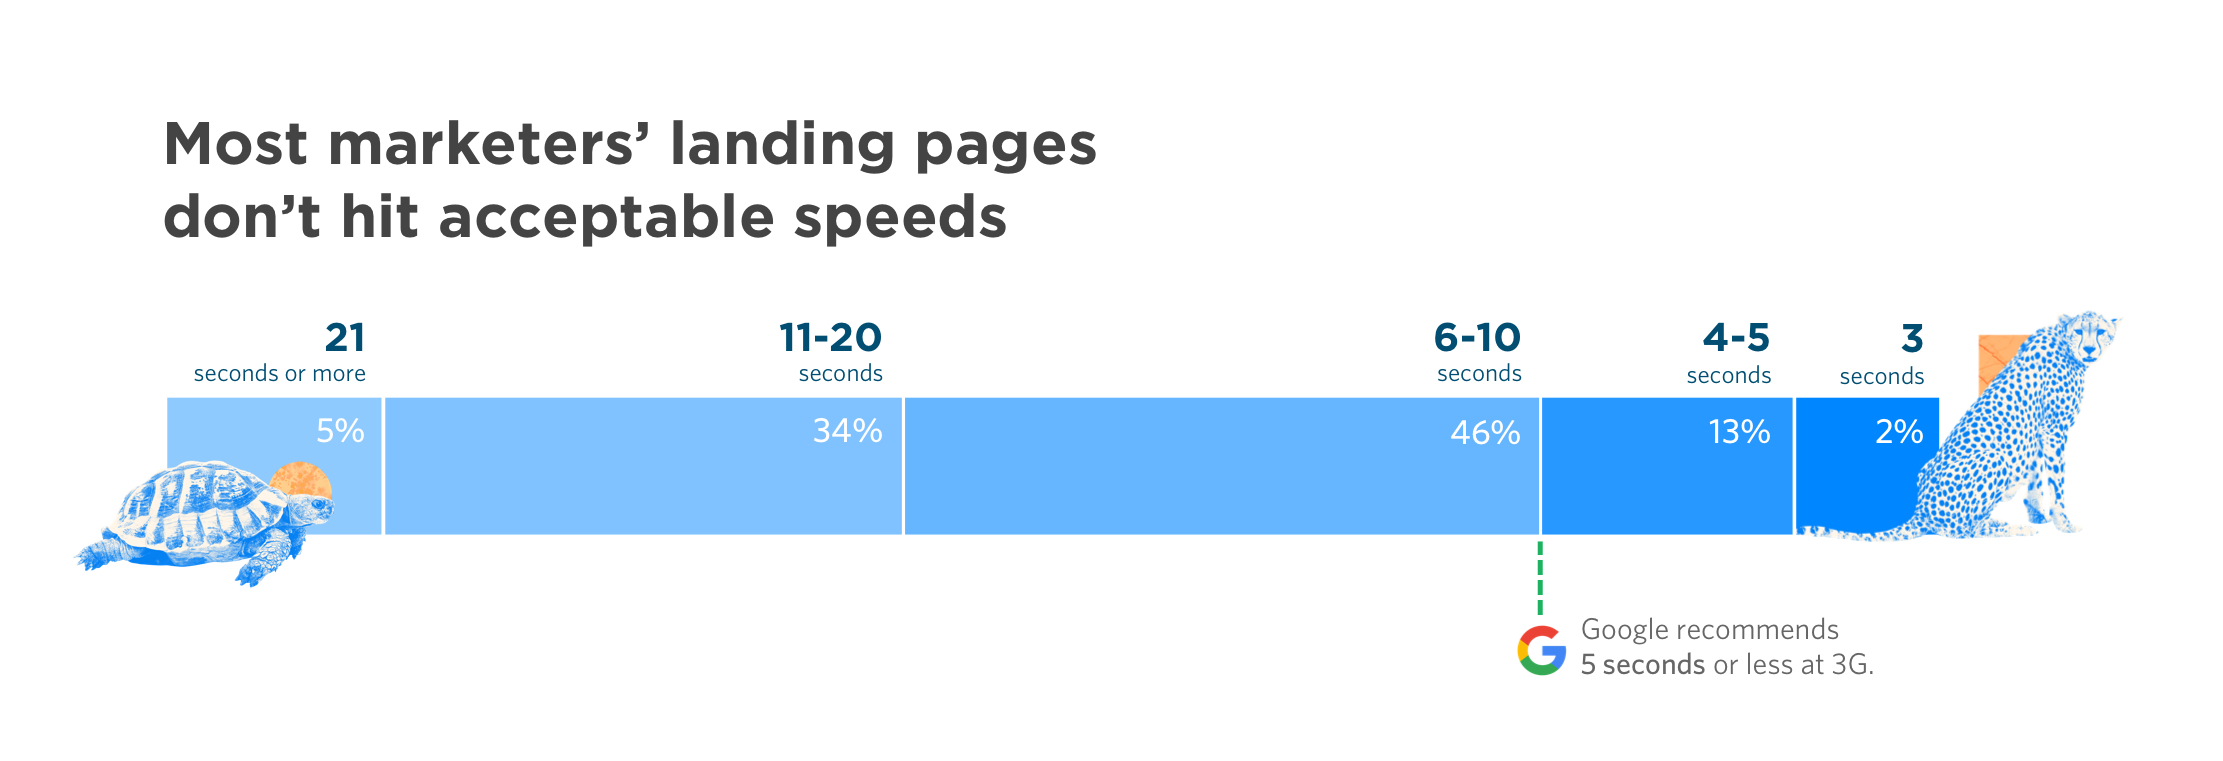 Only 2% of marketers had pages that loading in 3 seconds